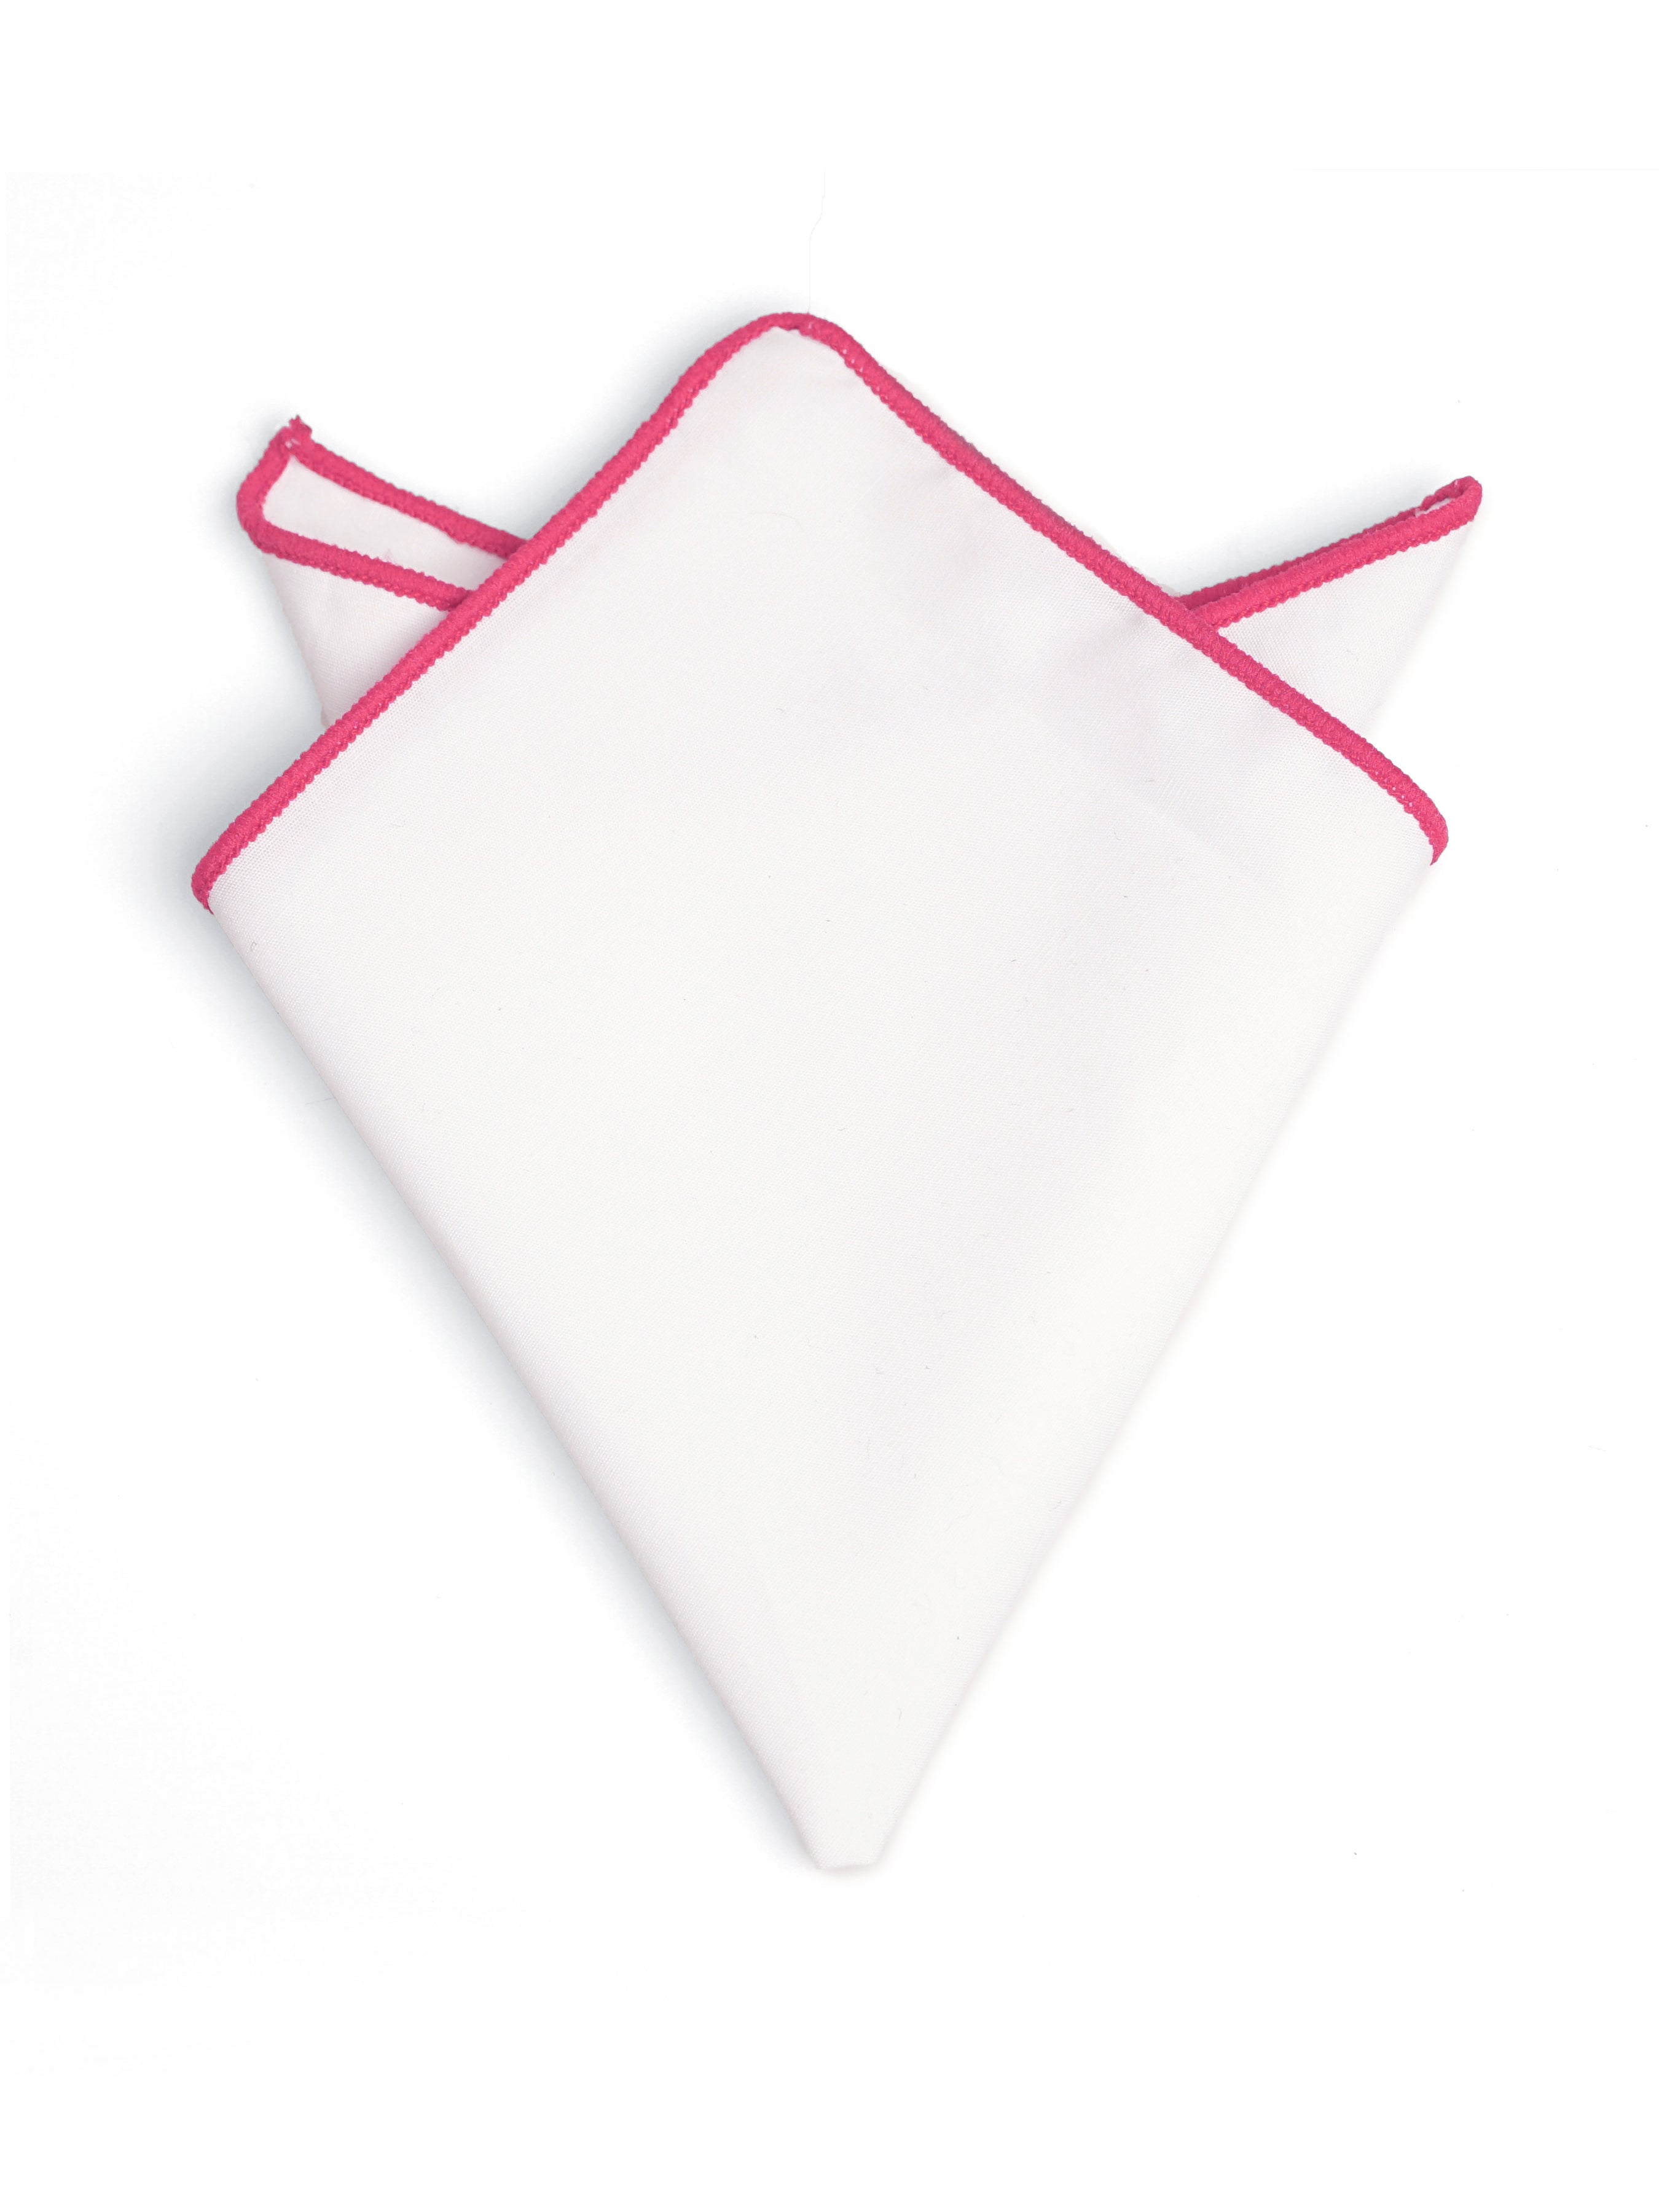 Cotton White Pocket Square with Contrast Piping